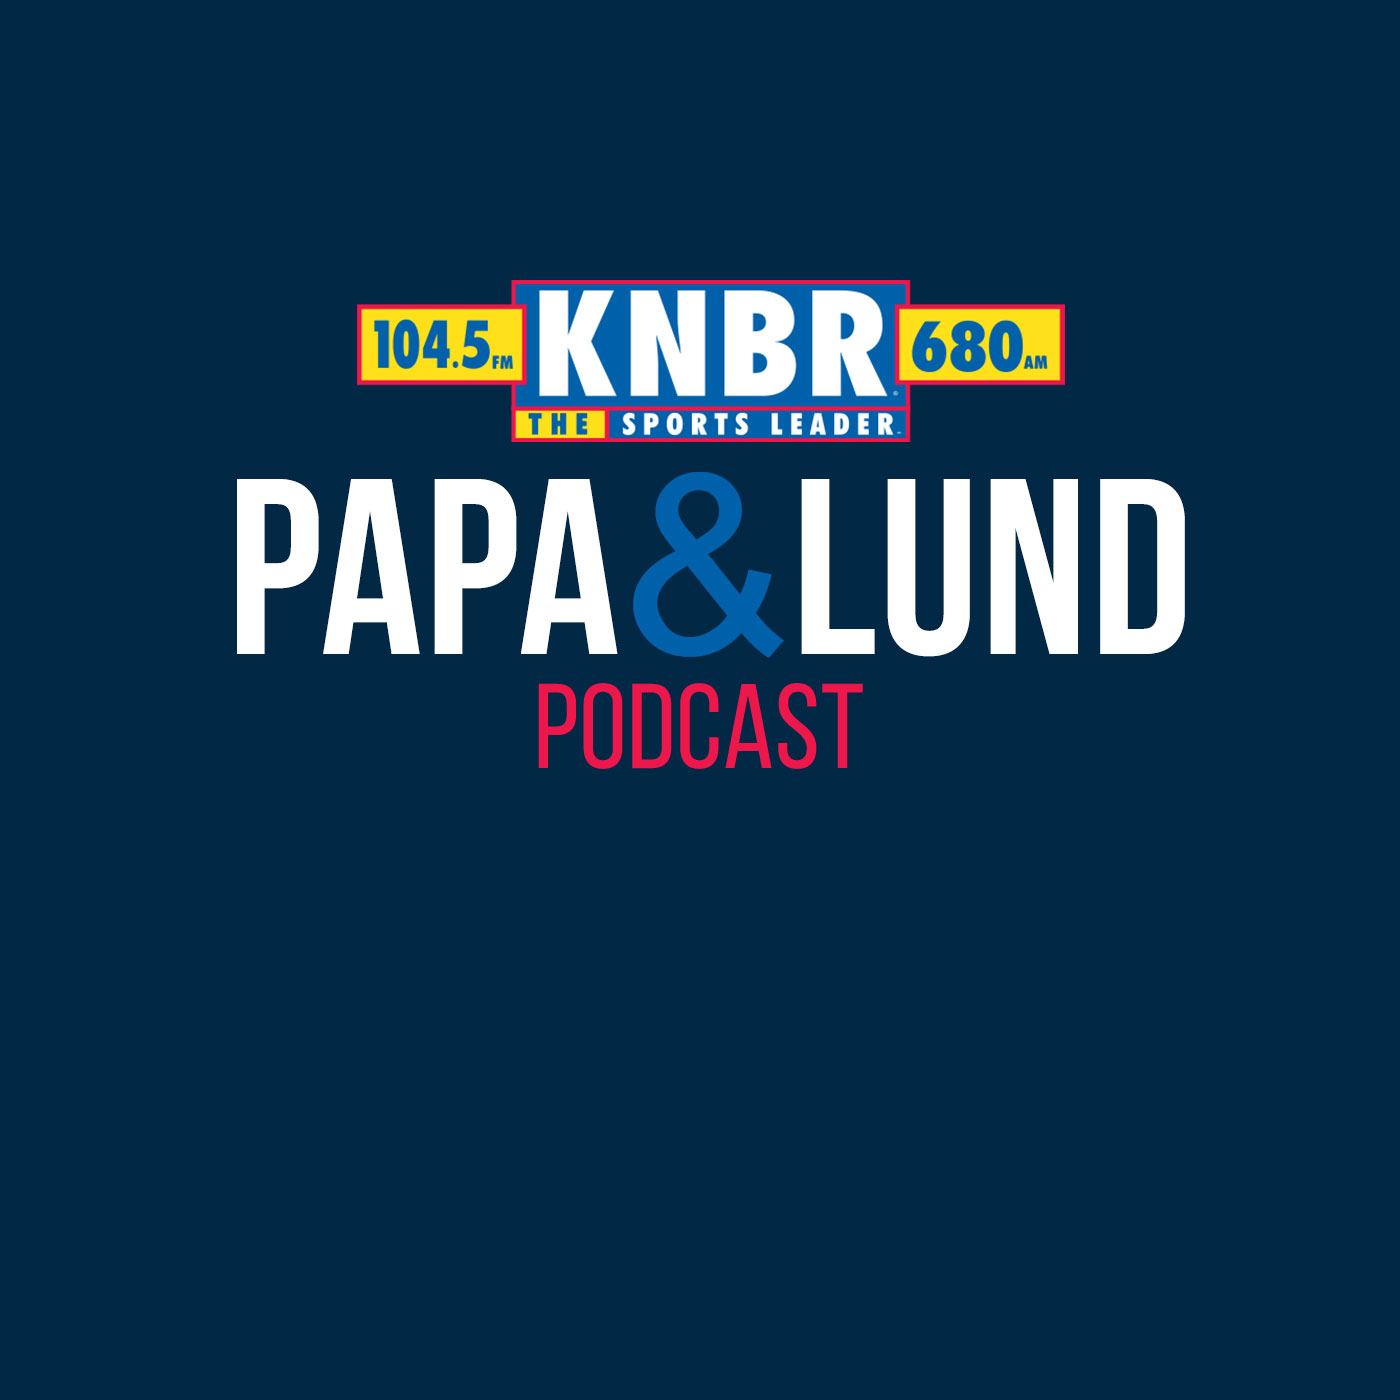 4-21 Shaun Powell joins Papa & Lund to break down the Warriors huge win in Game 3 of the series vs. Sacramento